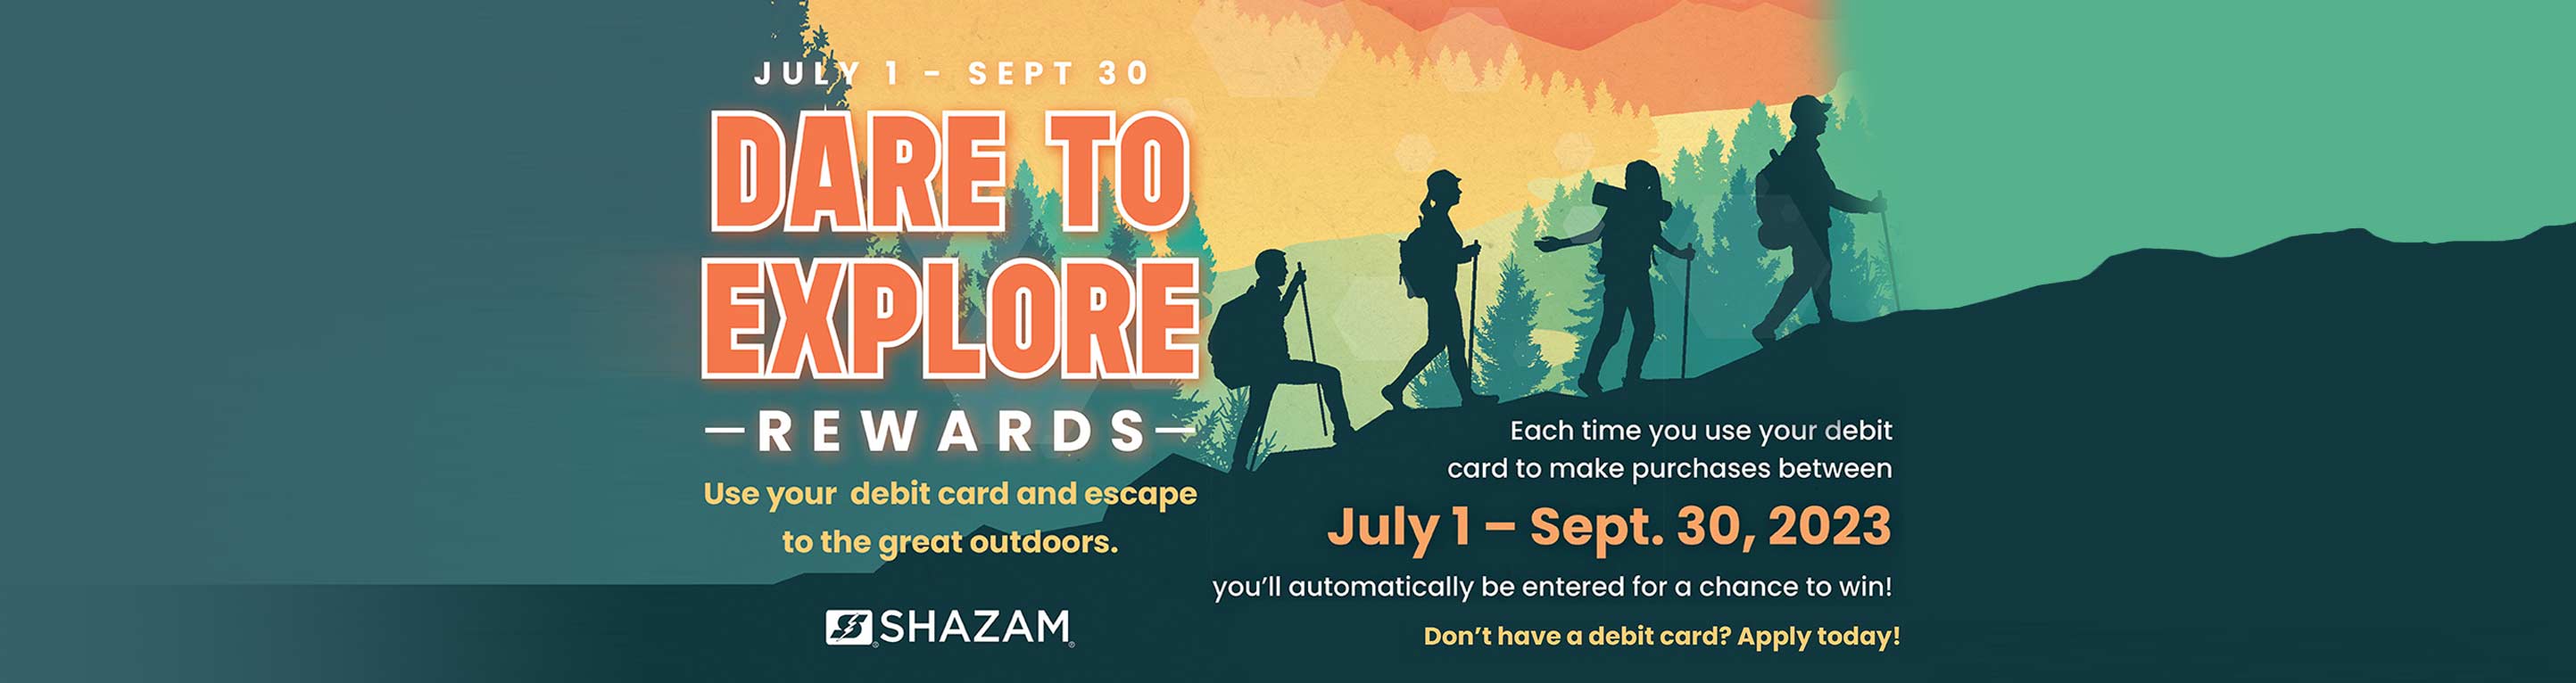 Dare To Explore Rewards. Use your debit card and escape to the great outdoors. Each time you use your debit card to make purchases between July 1 - Sept. 30, 2023 you'll automatically be entered for a chance to win! Don't have a debit card? Apply today!